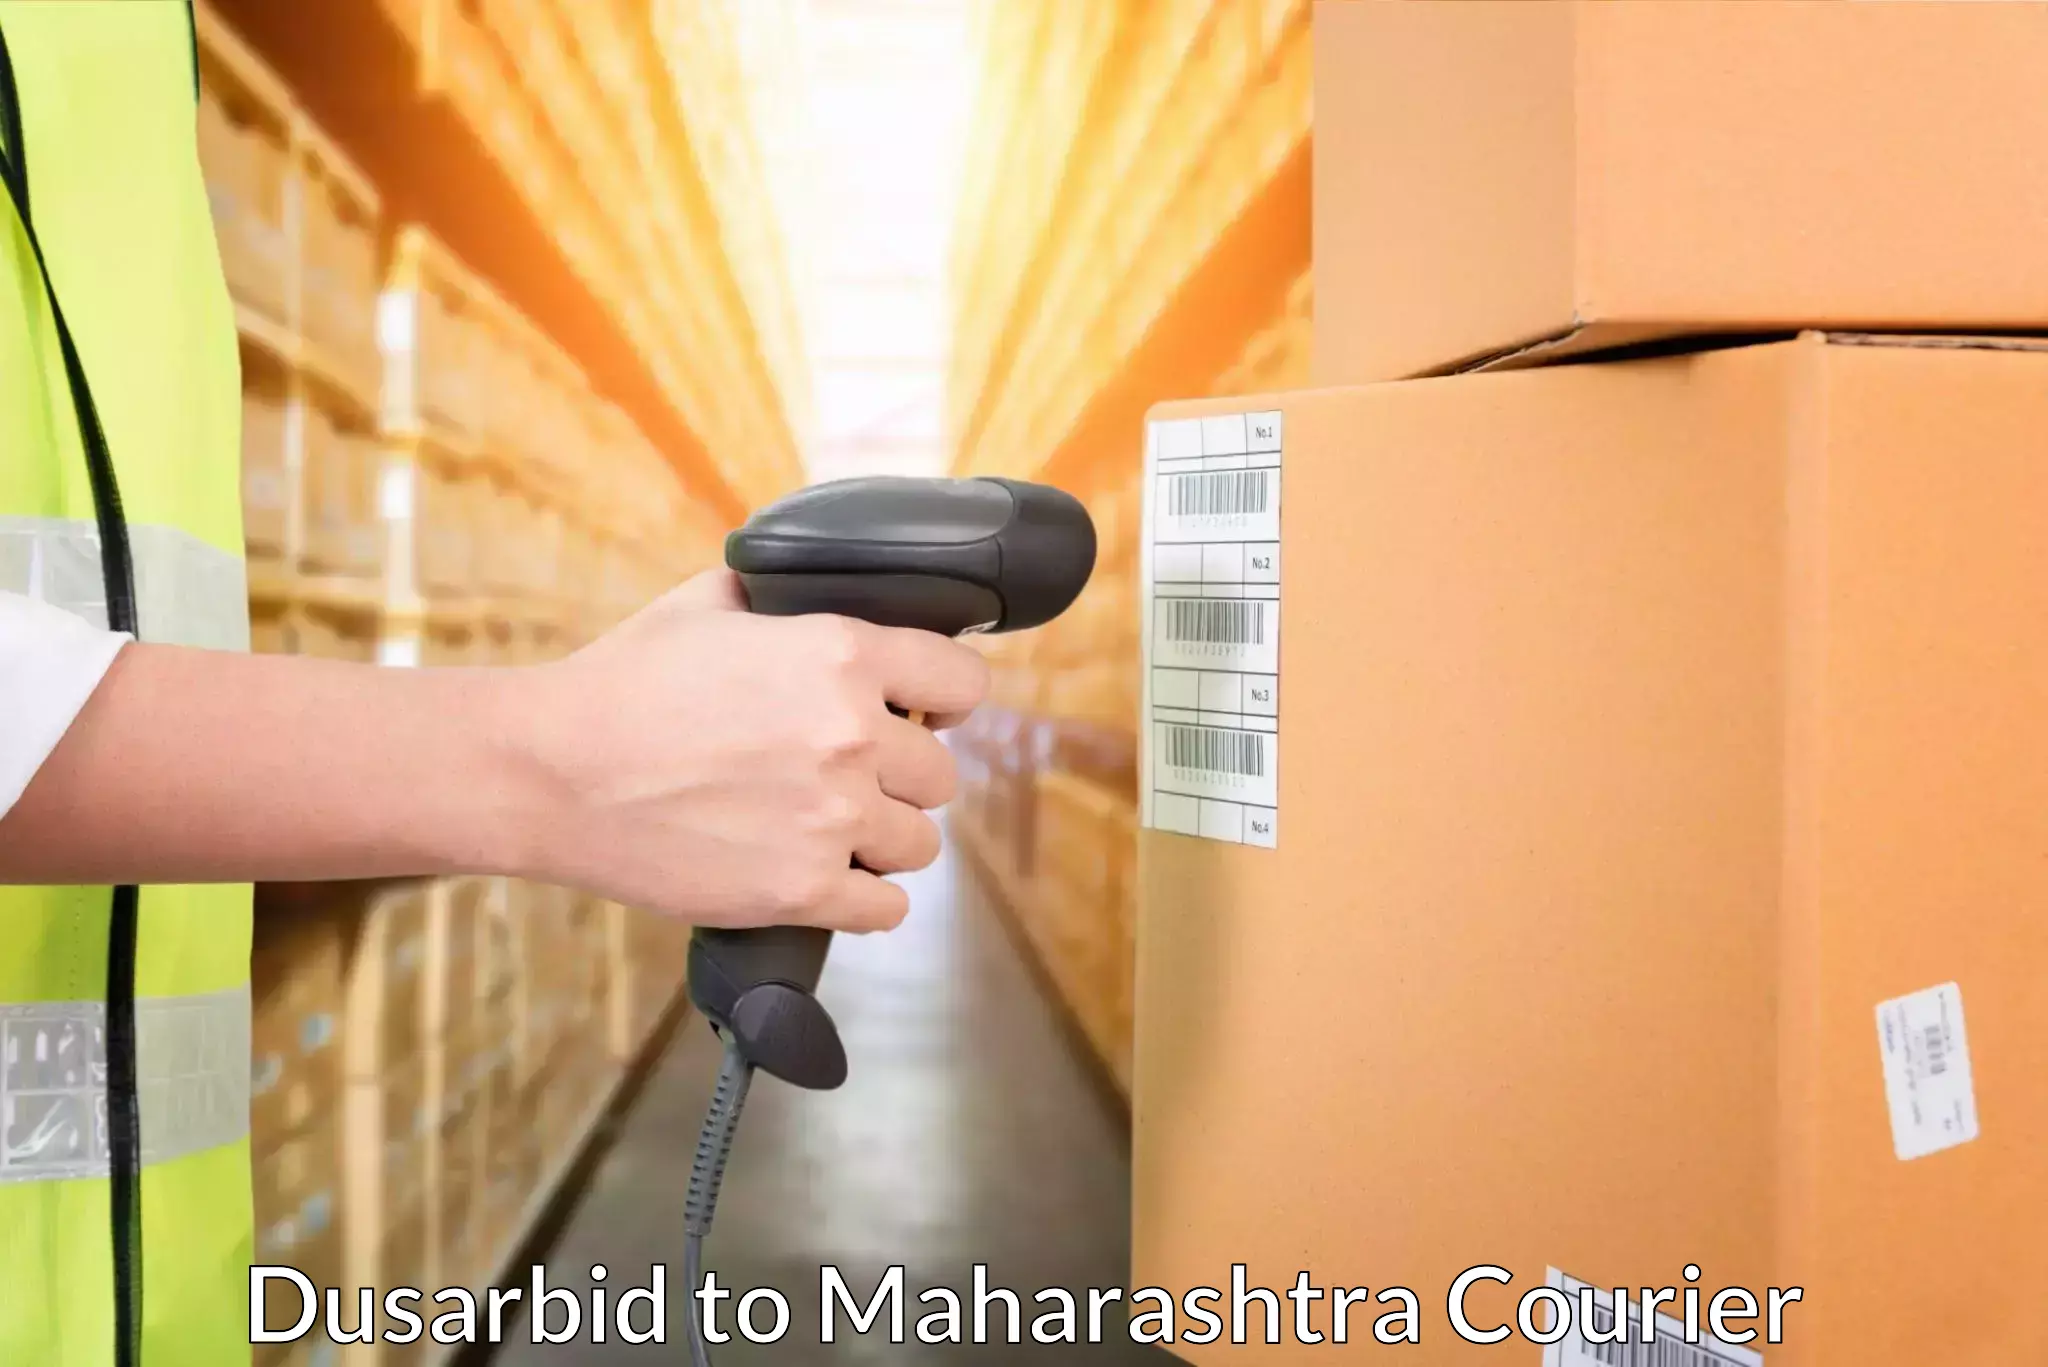 Heavyweight shipping in Dusarbid to Andheri